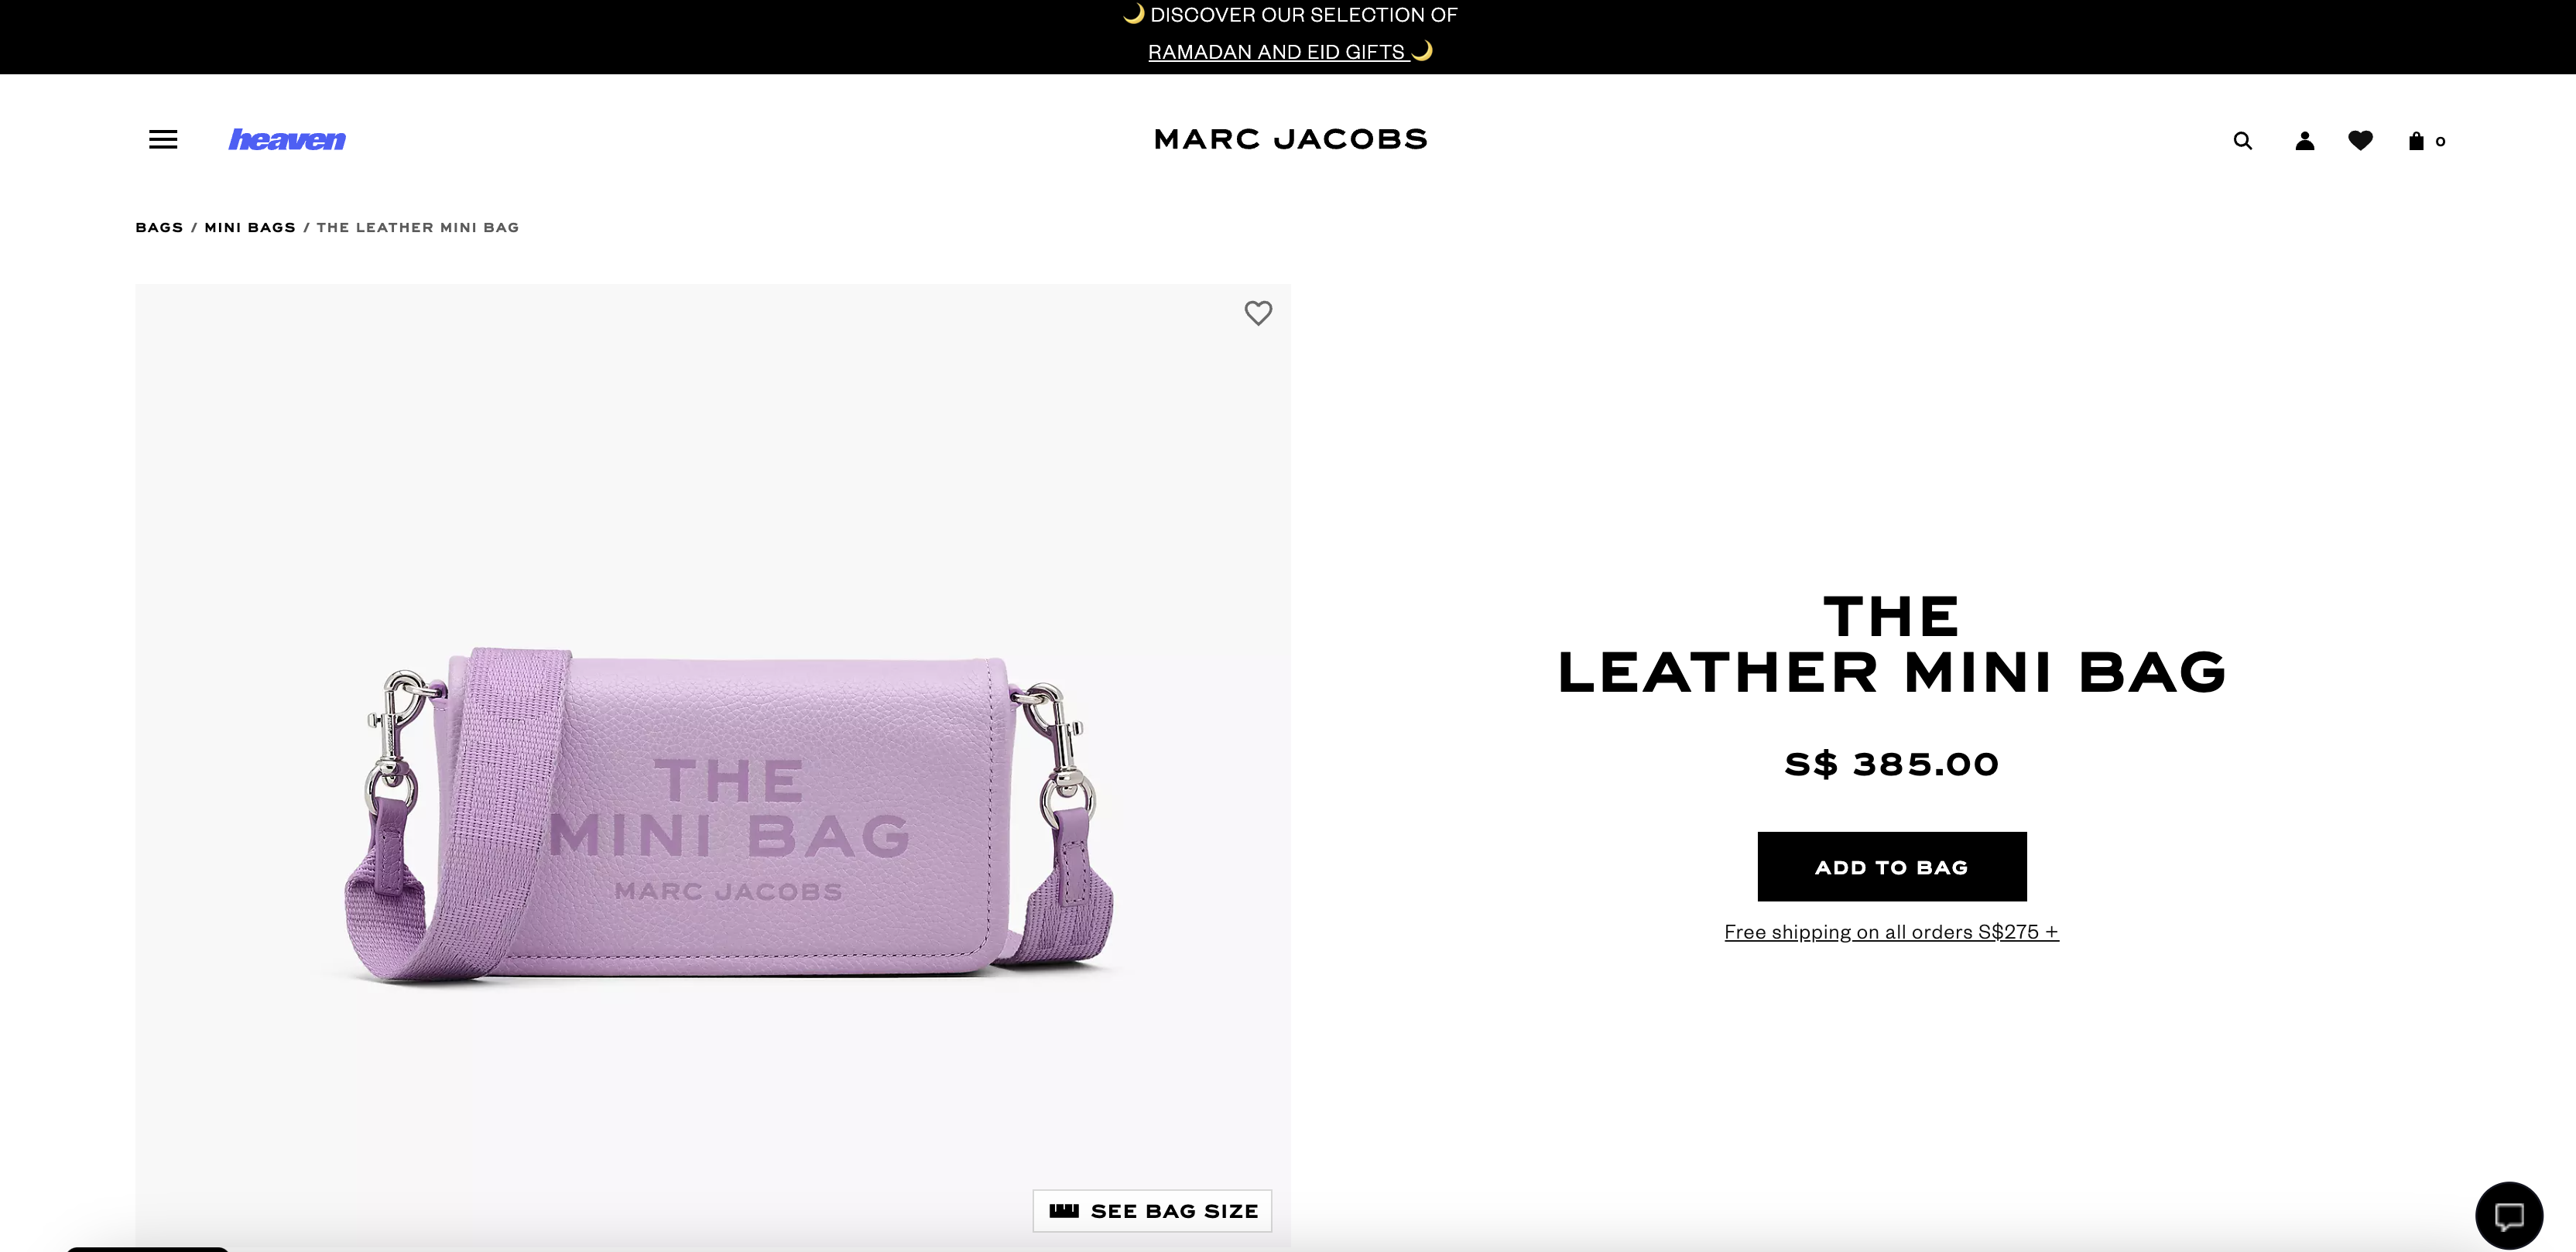 MARC JACOBS THE LEATHER MINI BAG